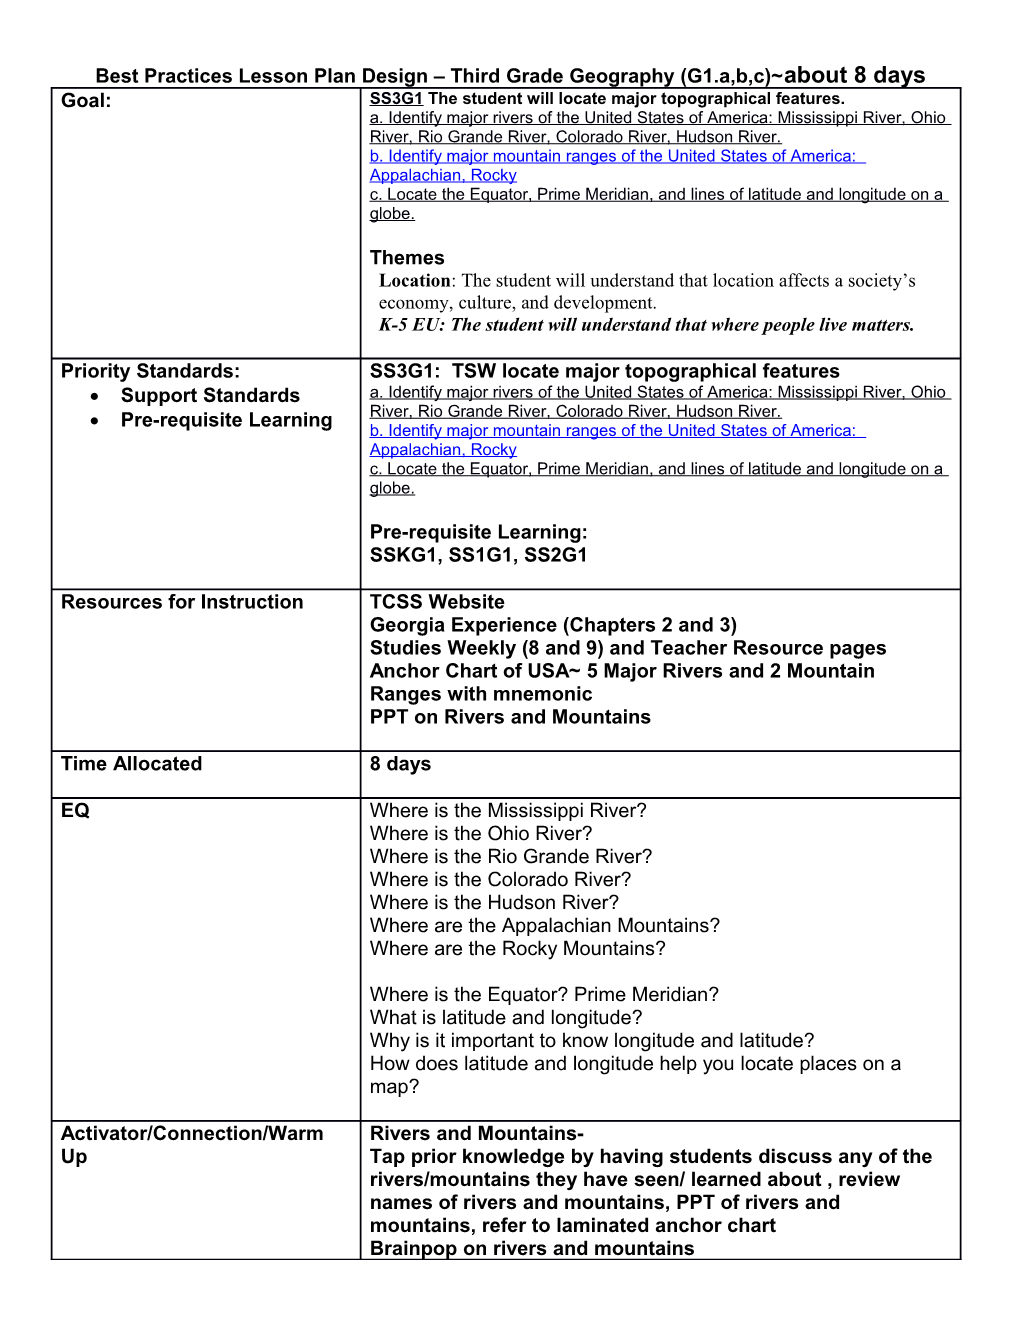 Best Practices Lesson Plan Design Third Grade Geography (G1.A,B,C) About 8 Days